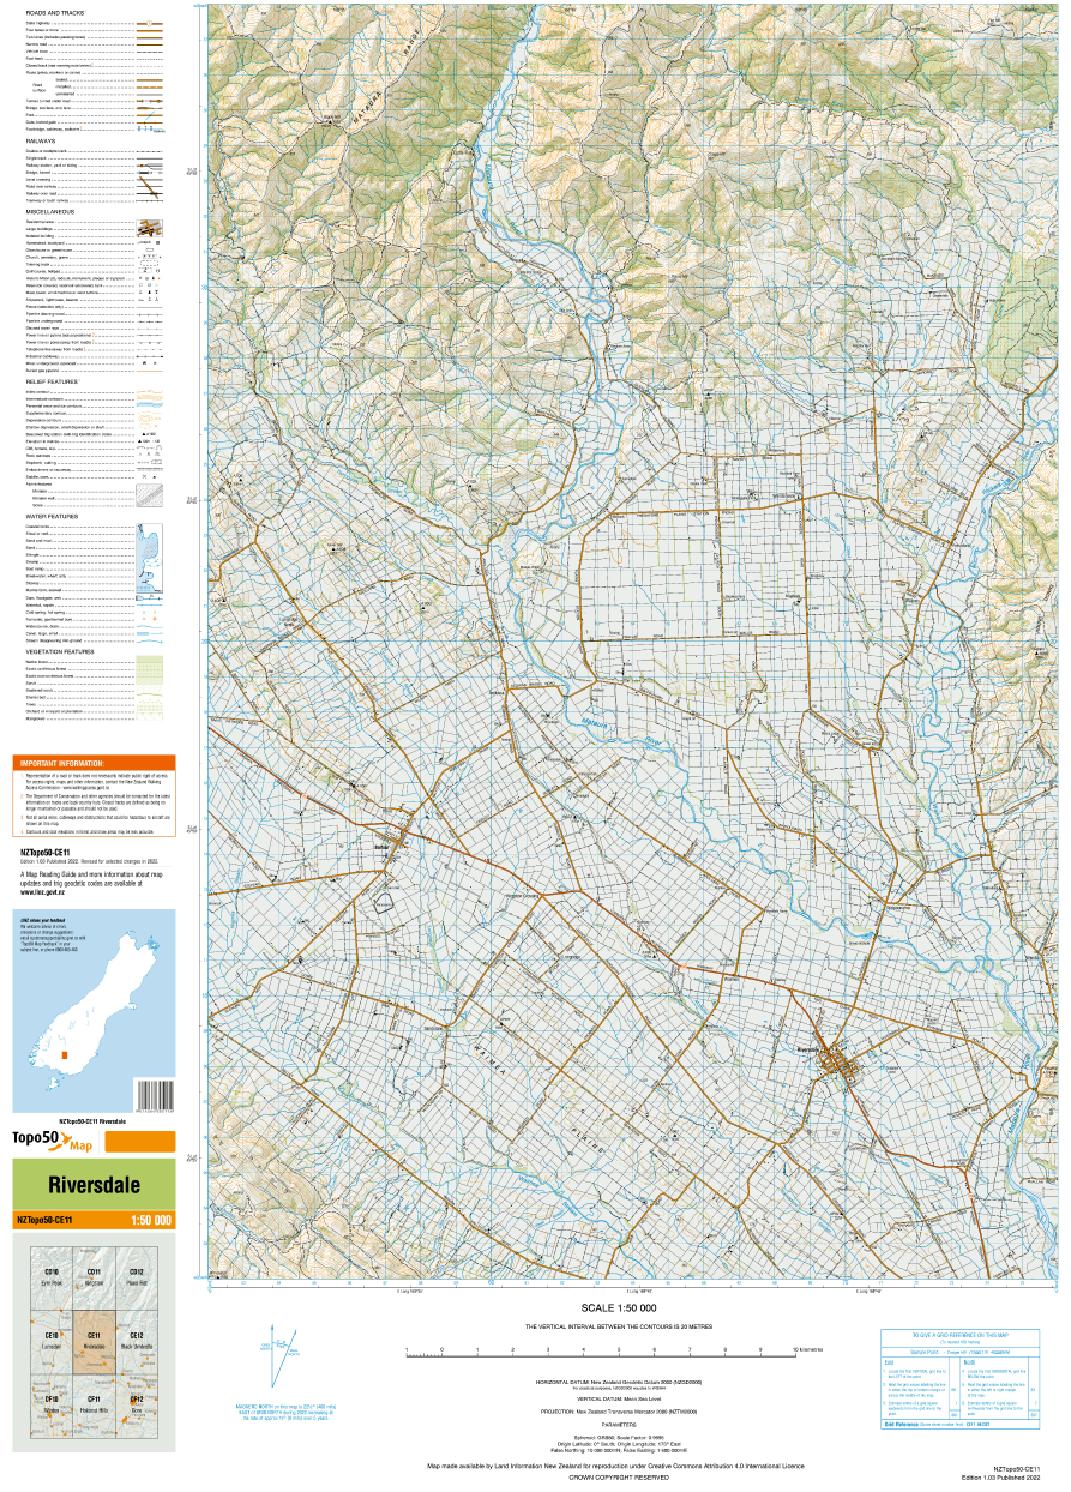 Topo map of Riversdale